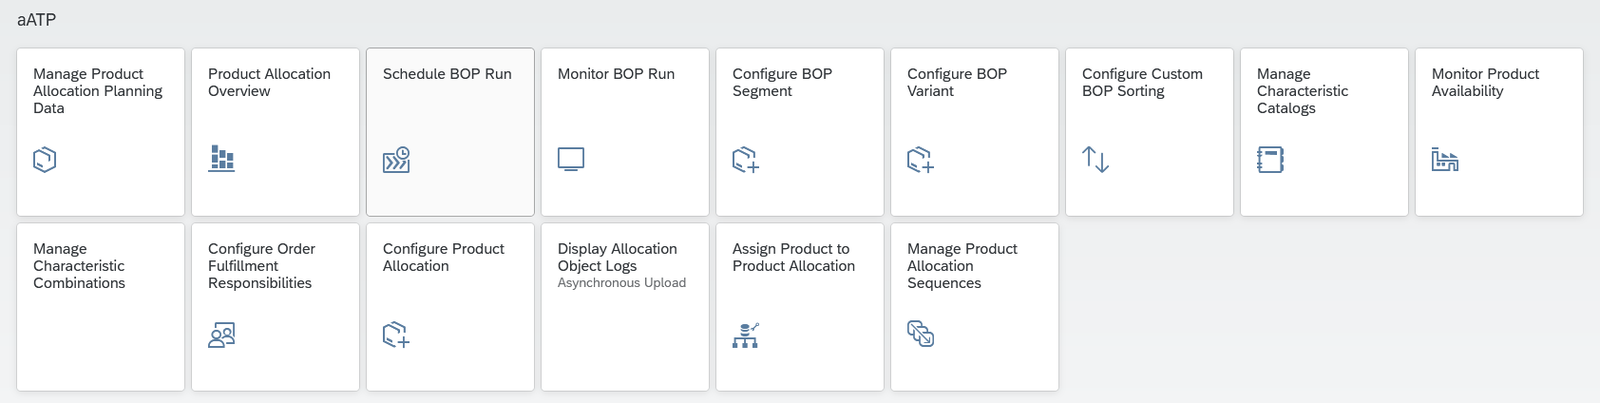 Available SAP Fiori Apps in SAP aATP